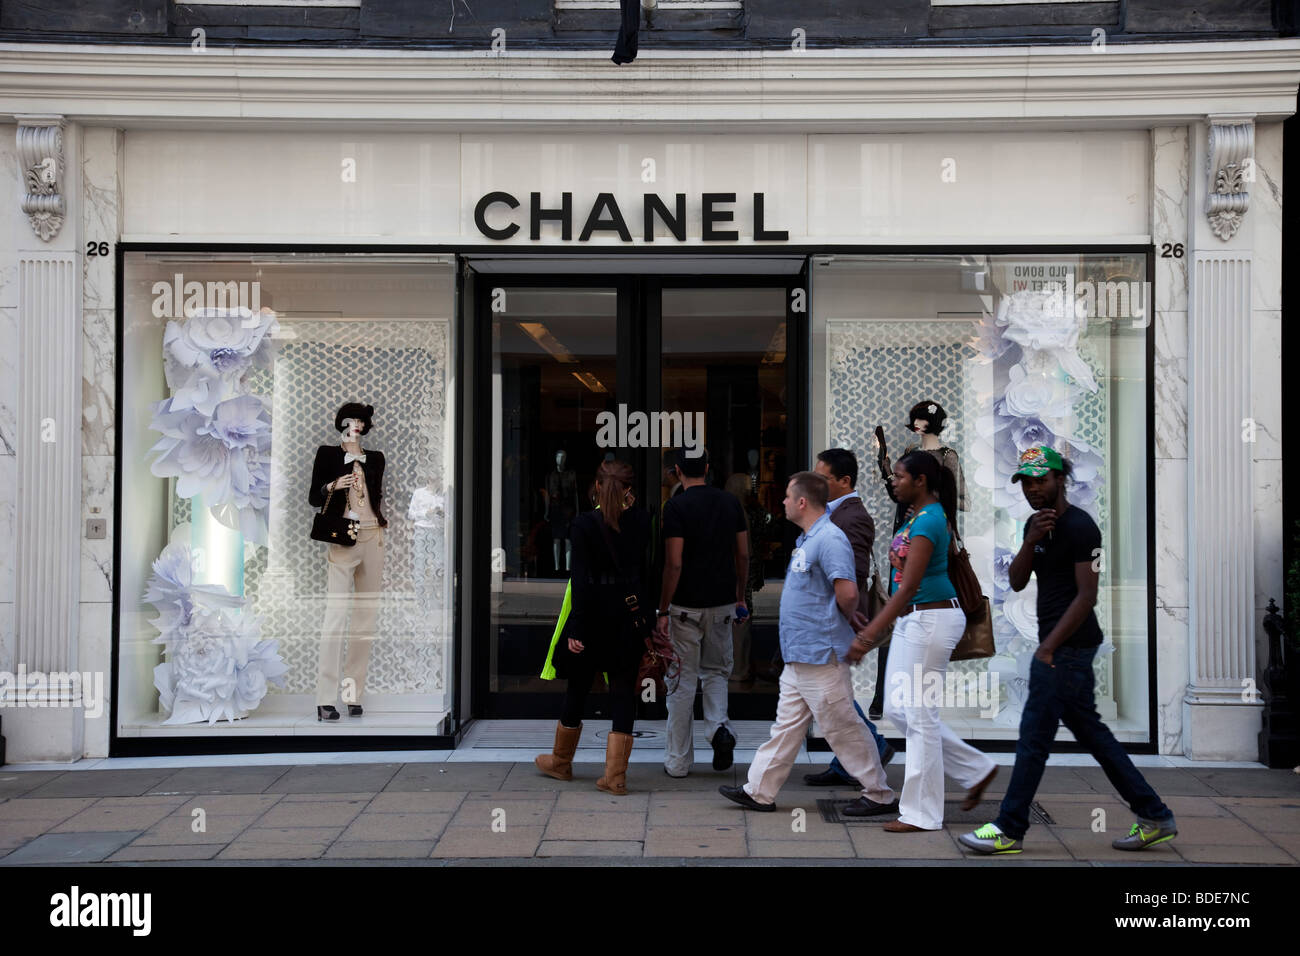 Return policy at Chanel Stores??